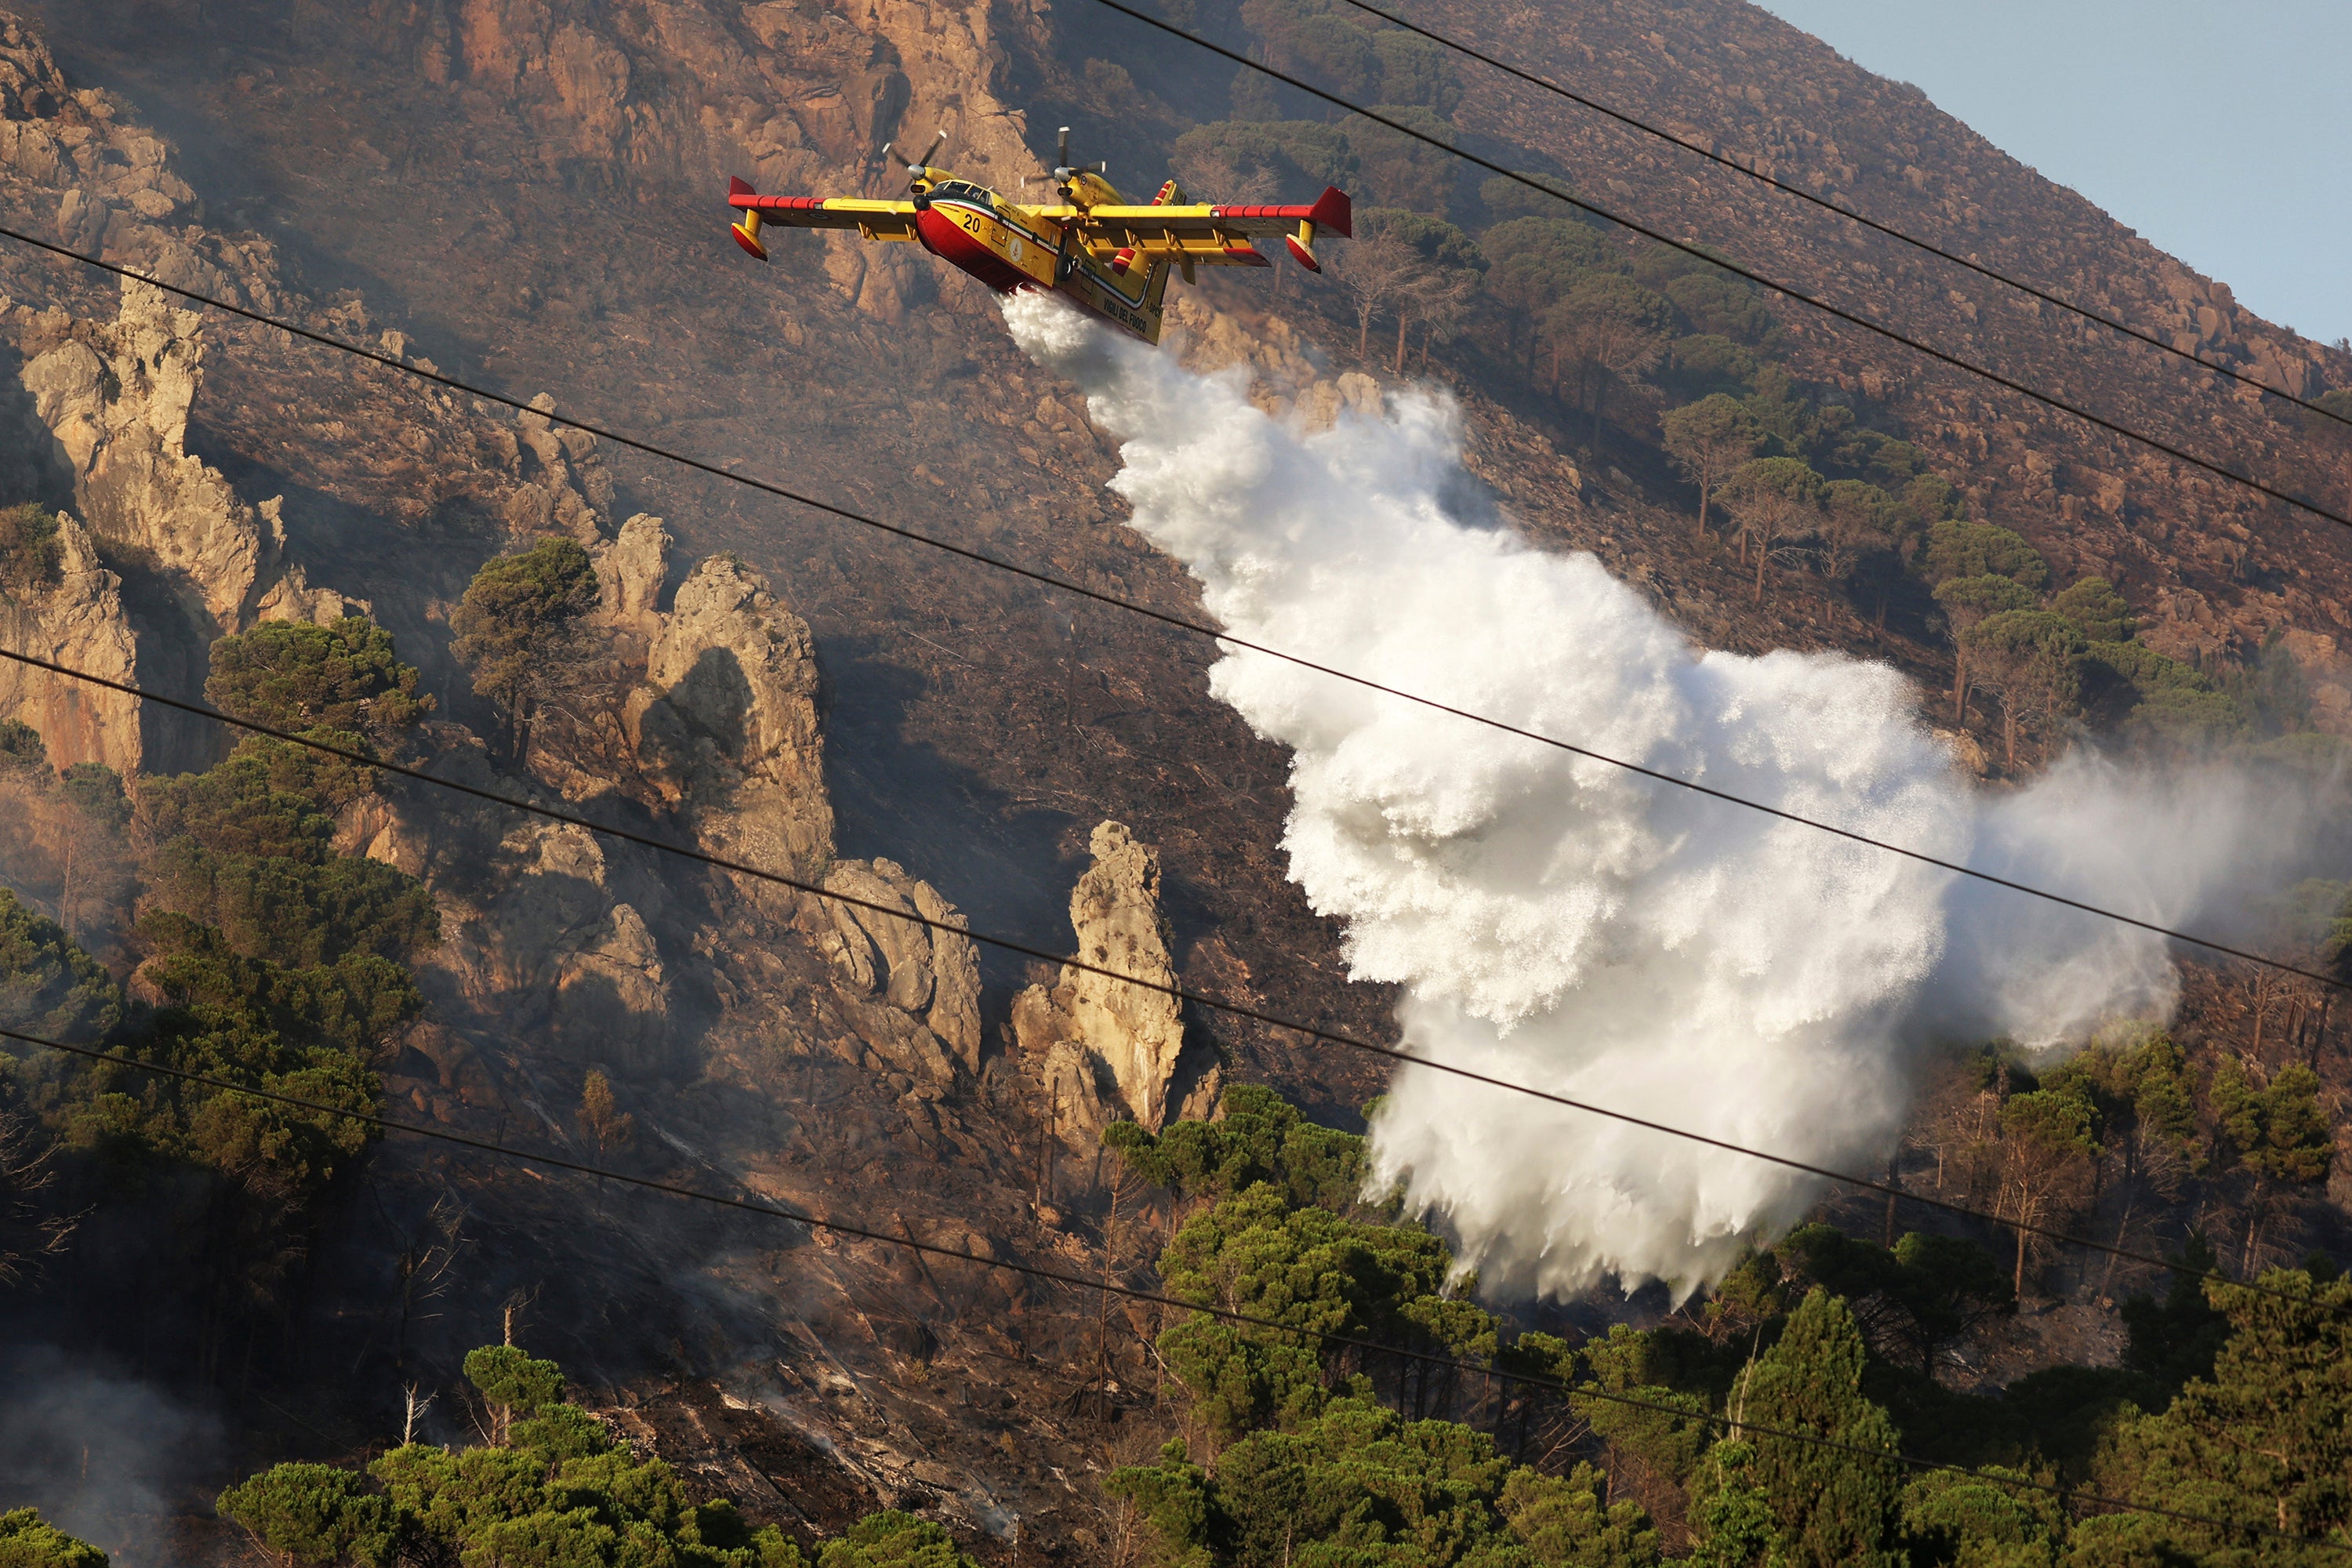 A firefighting plane drains water on a wildfire on the mountain in Altofonte near Palermo, Italy